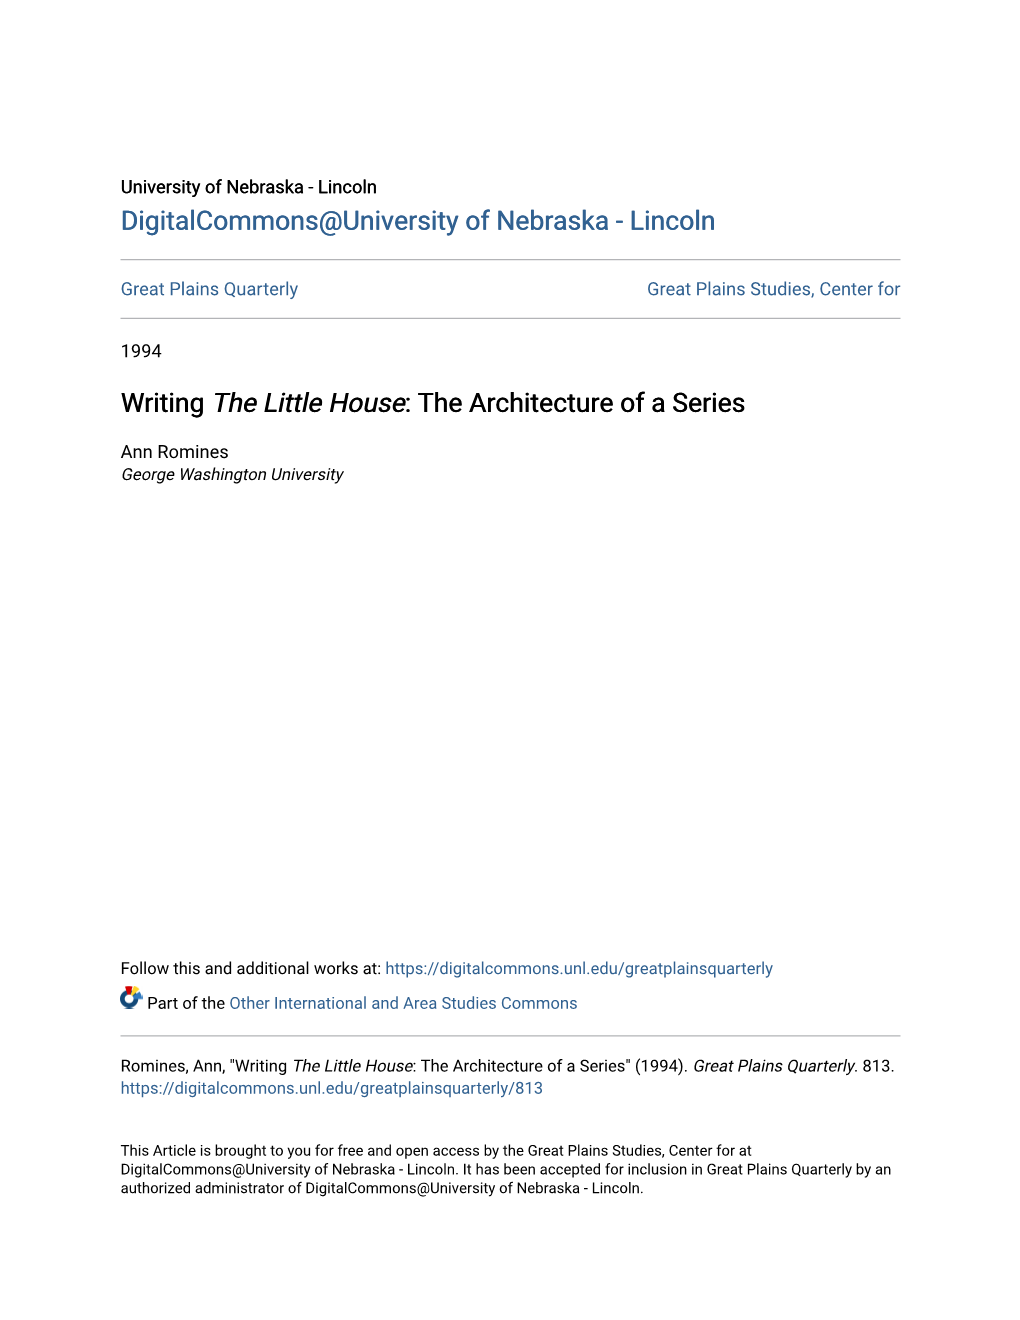 Writing the Little House: the Architecture of a Series